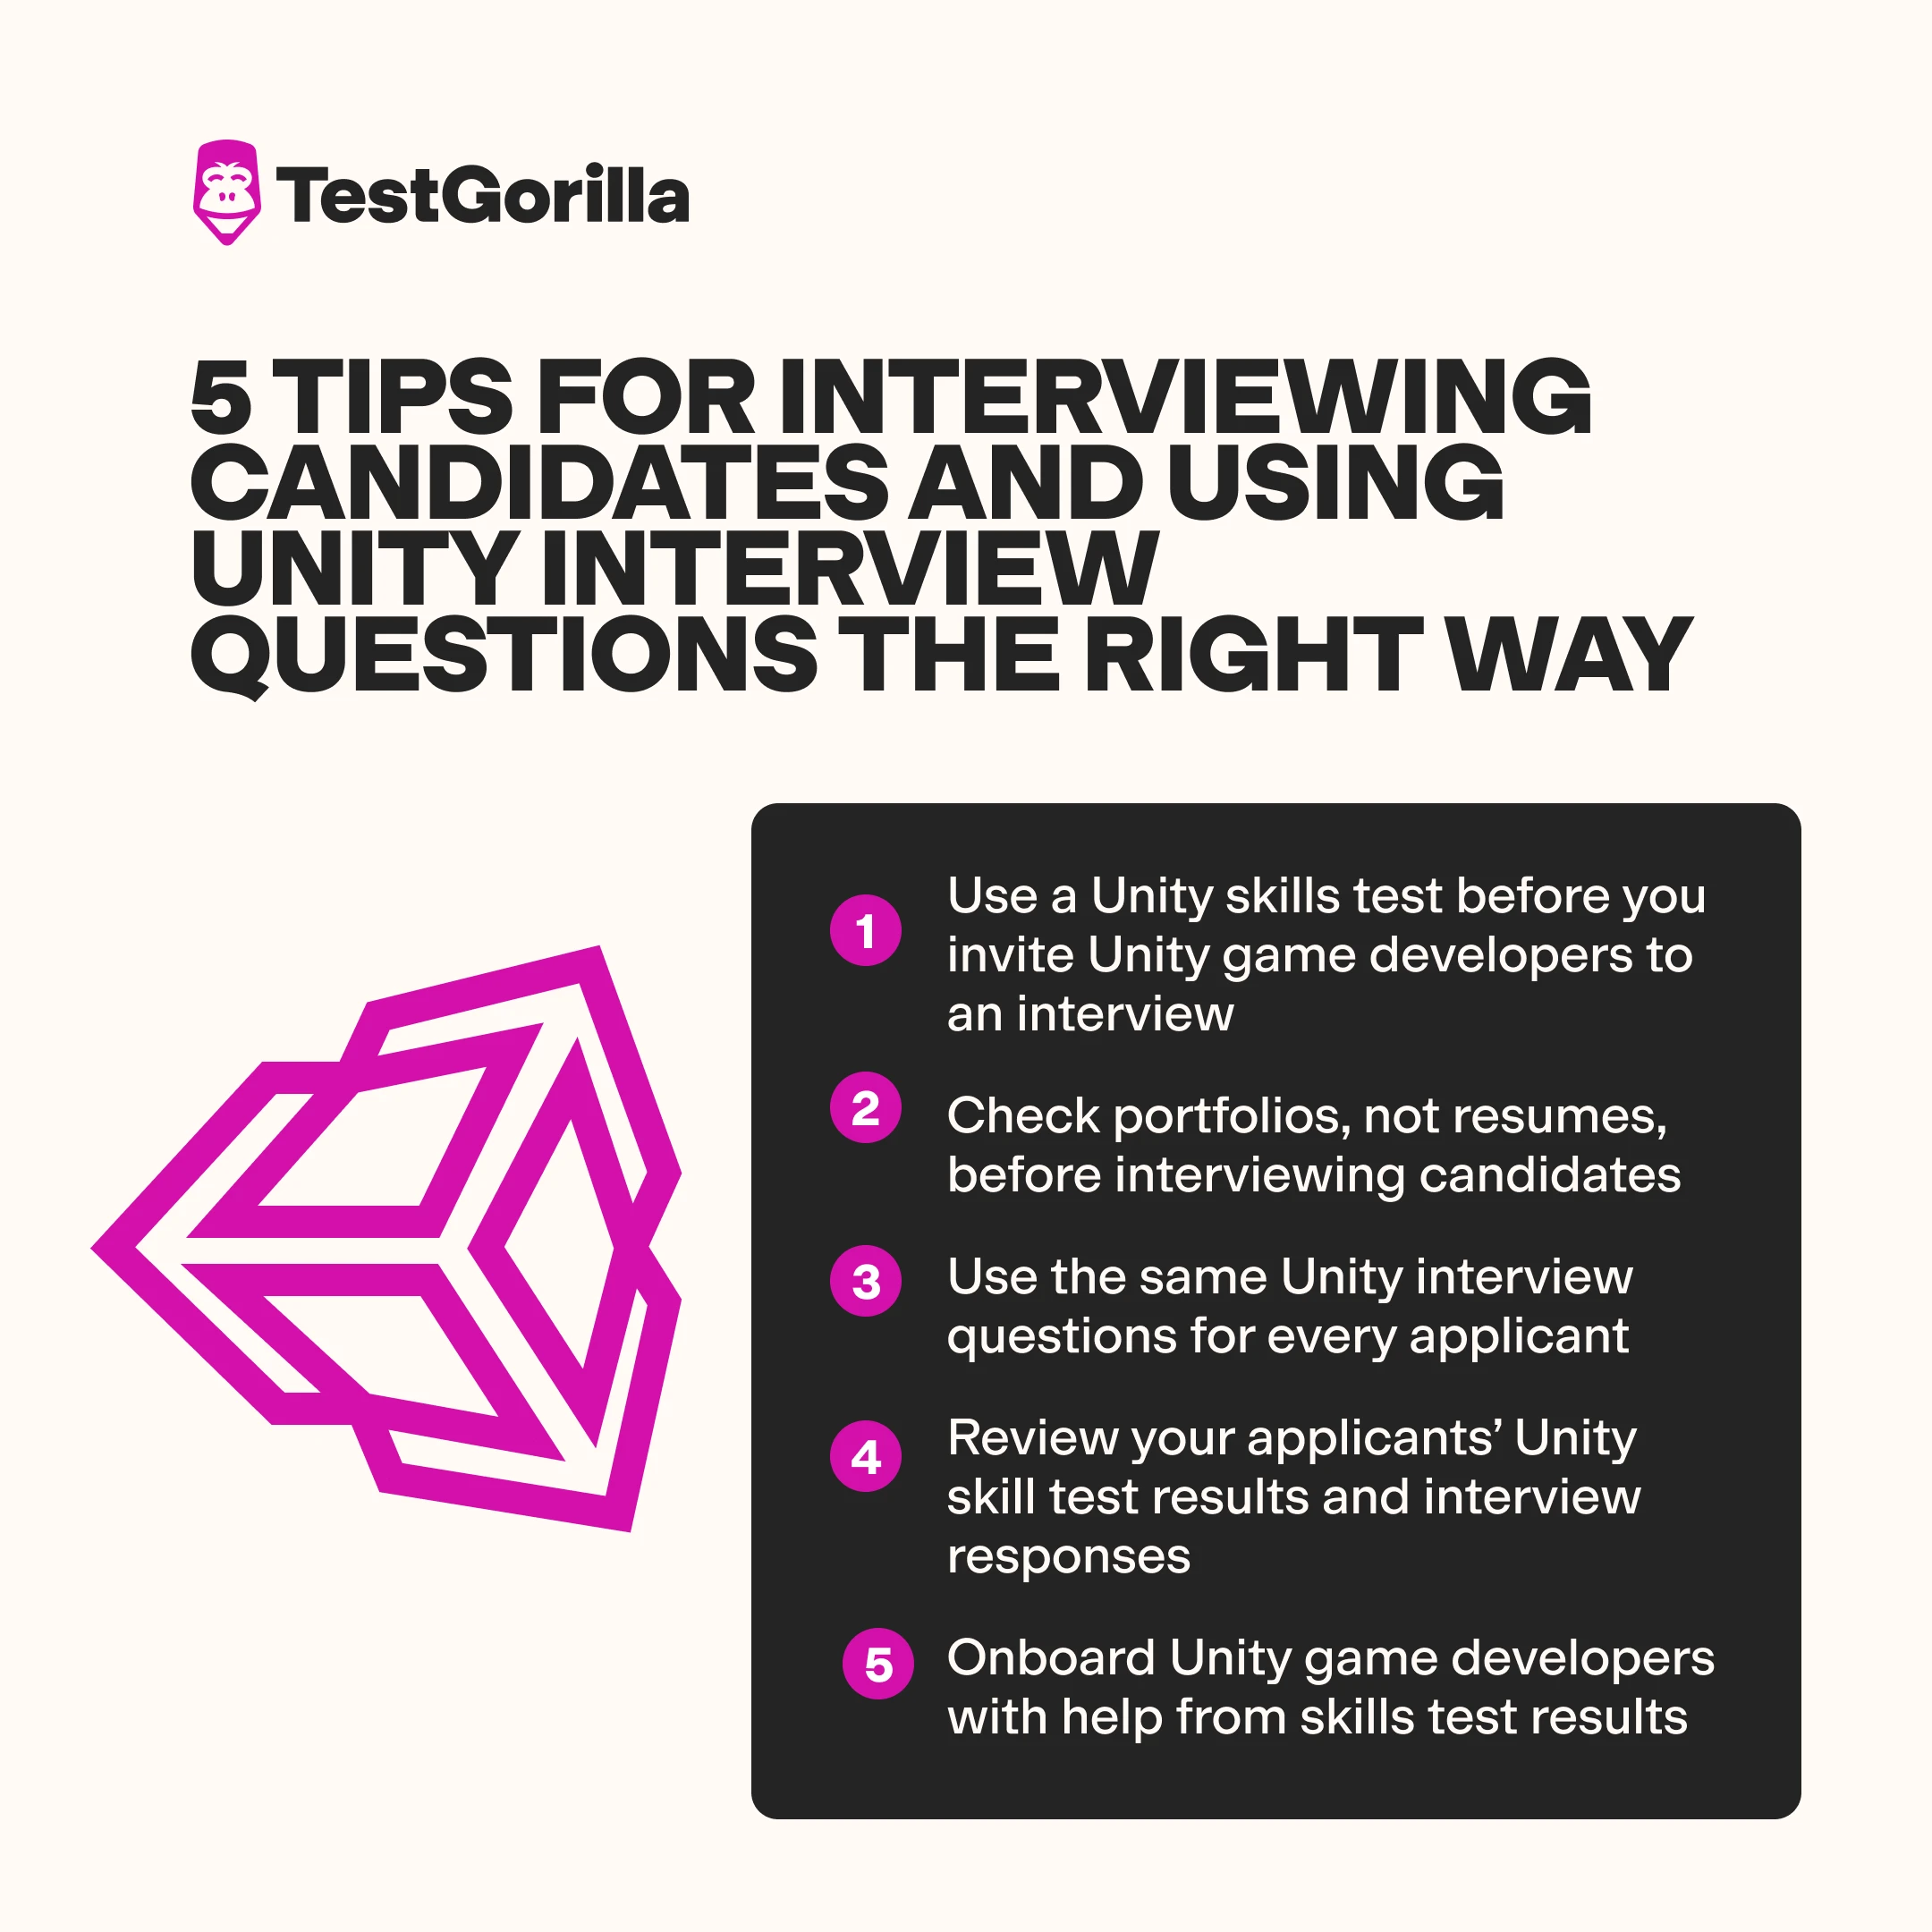 5 tips for interviewing candidates and using Unity interview questions the right way